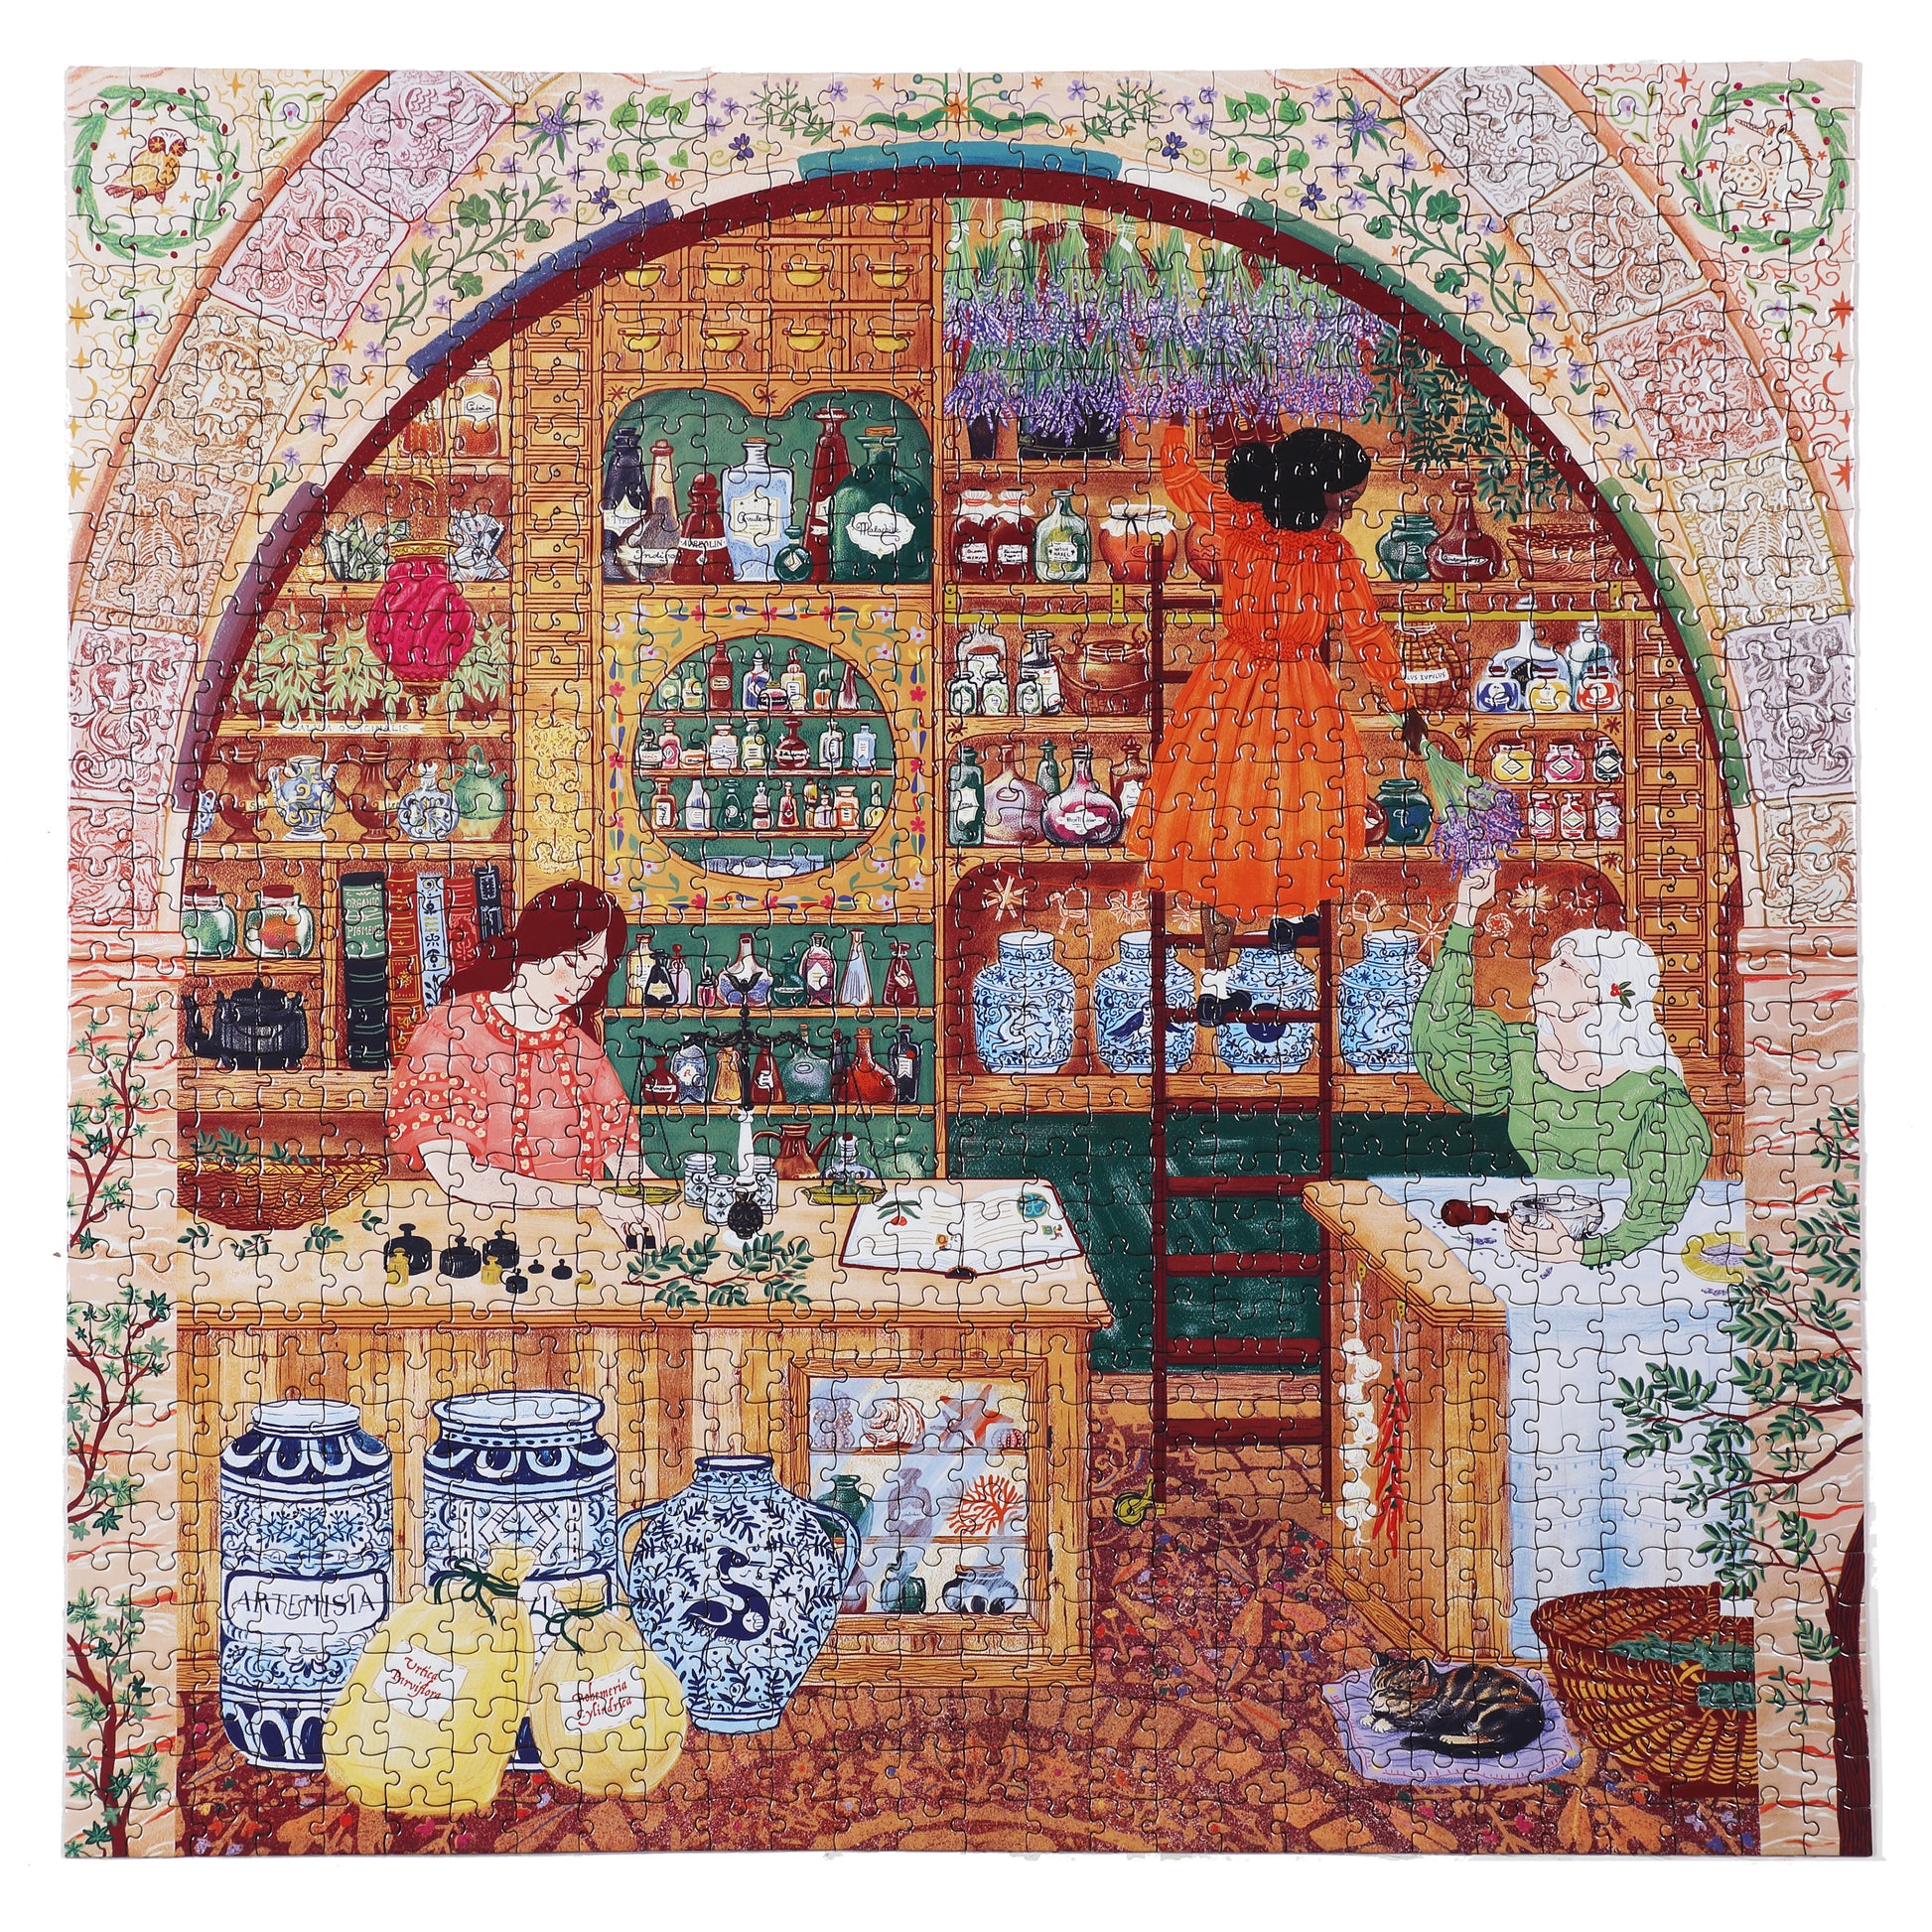 Ancient Apothecary 1000 Piece Jigsaw Puzzle | eeBoo Piece & Love | Amazing Gifts for Women Mom Wife